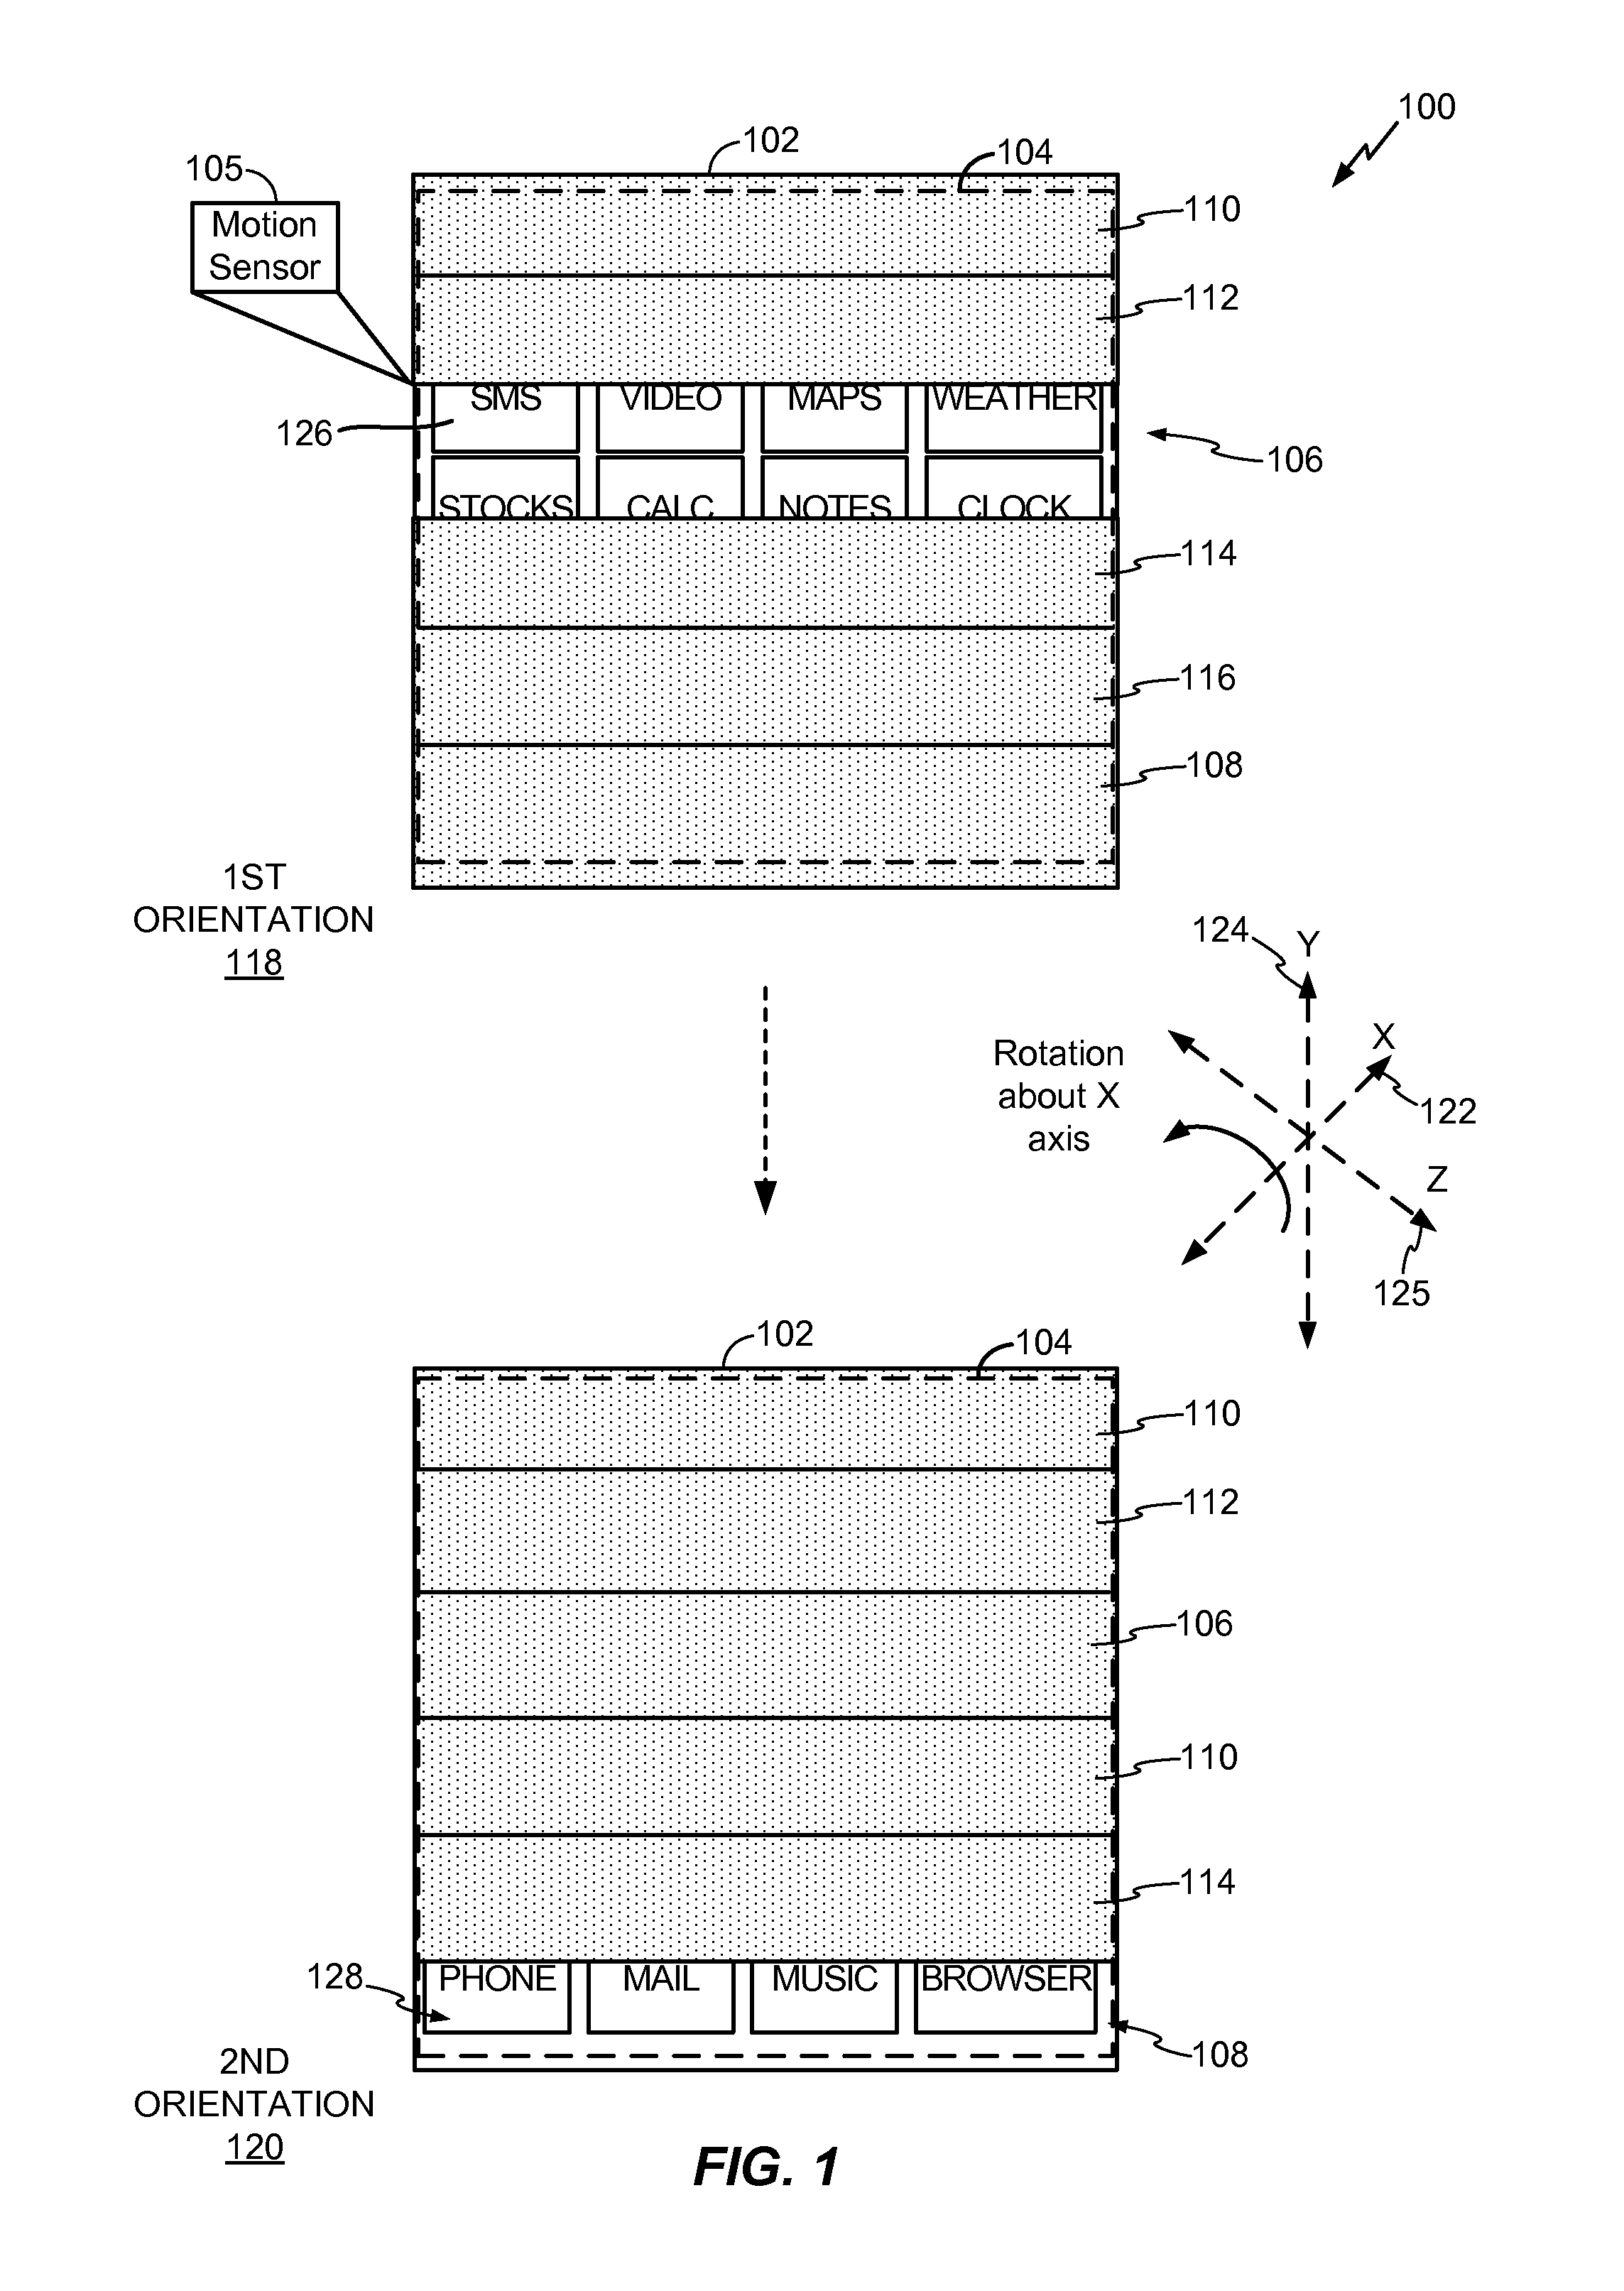 Extending battery life of a portable electronic device